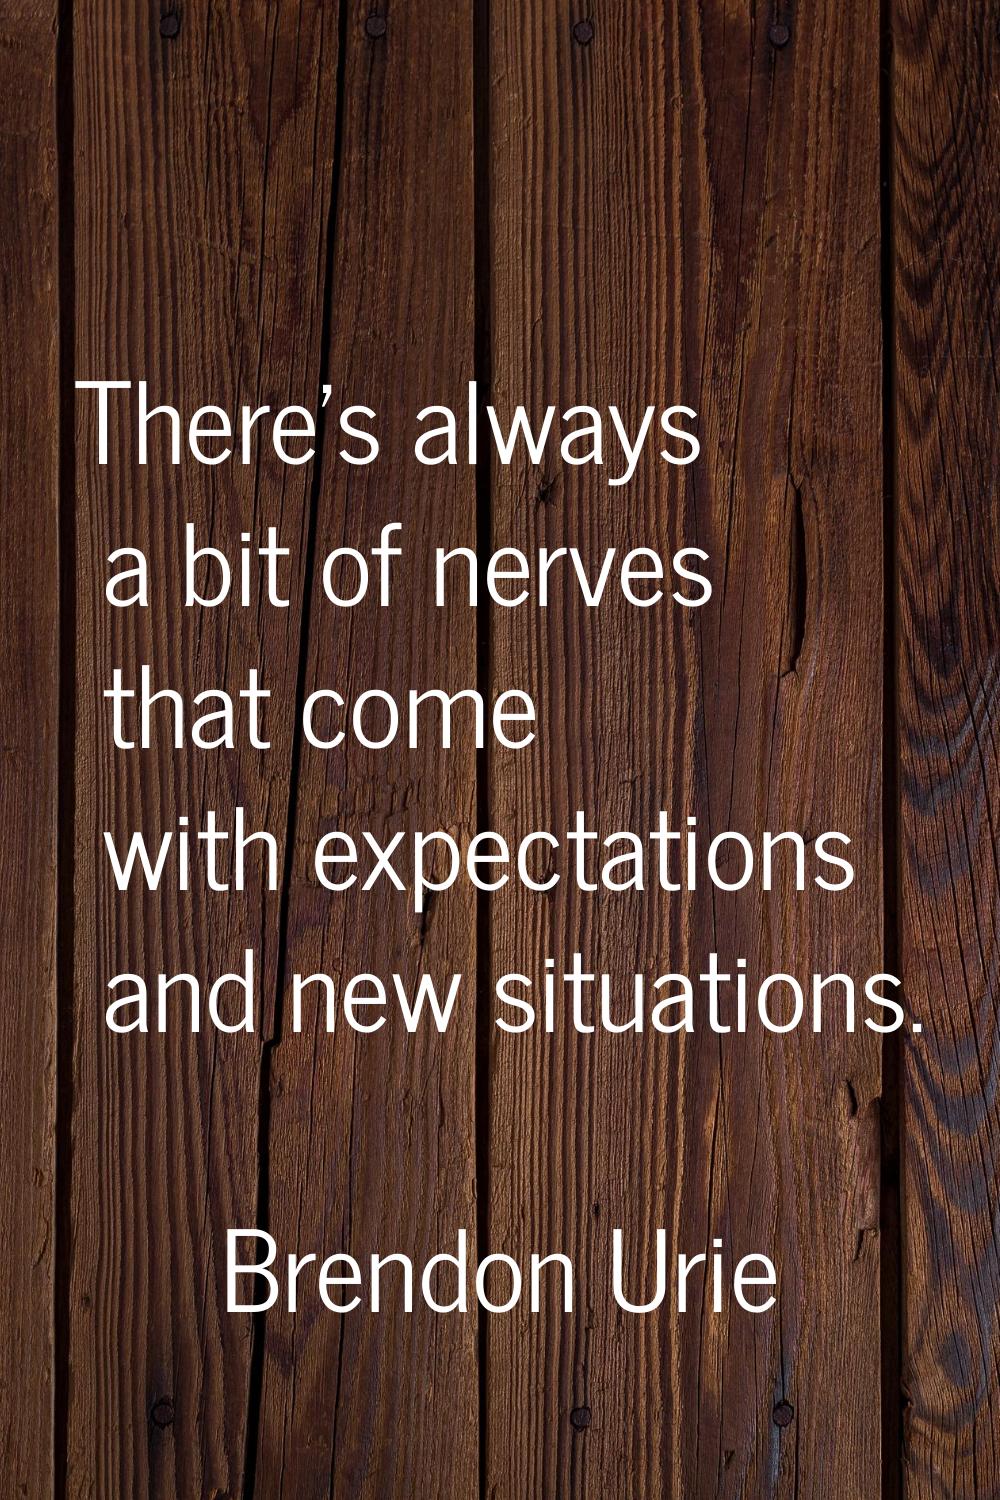 There's always a bit of nerves that come with expectations and new situations.